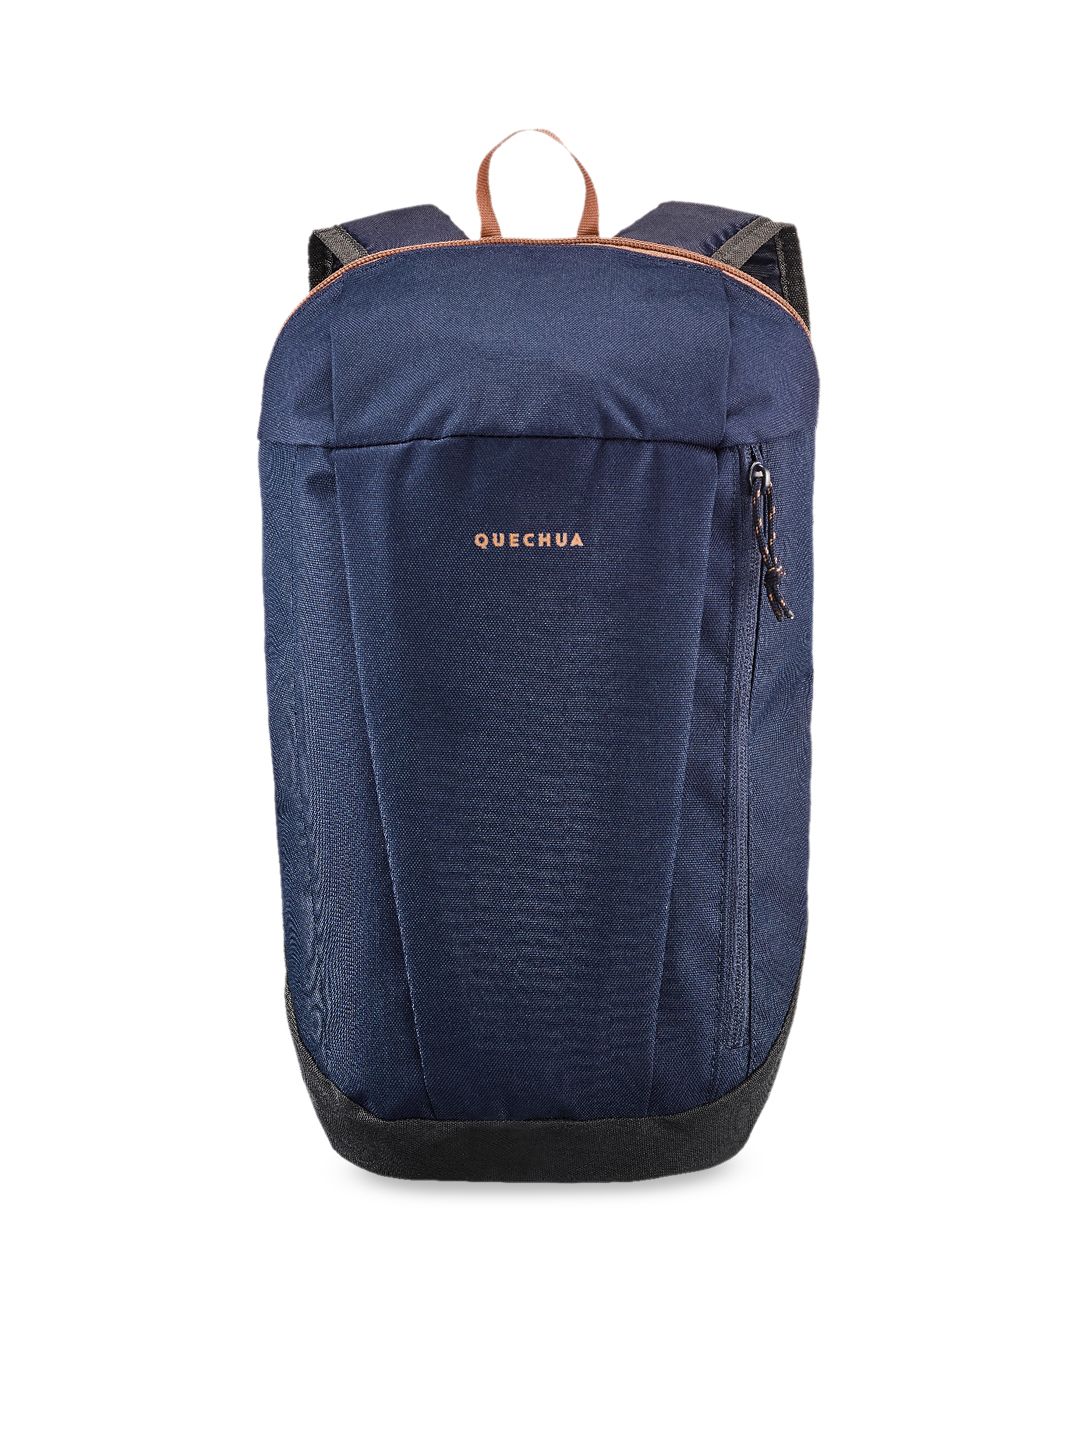 Quechua By Decathlon Navy Blue Solid Hiking Backpack Price in India